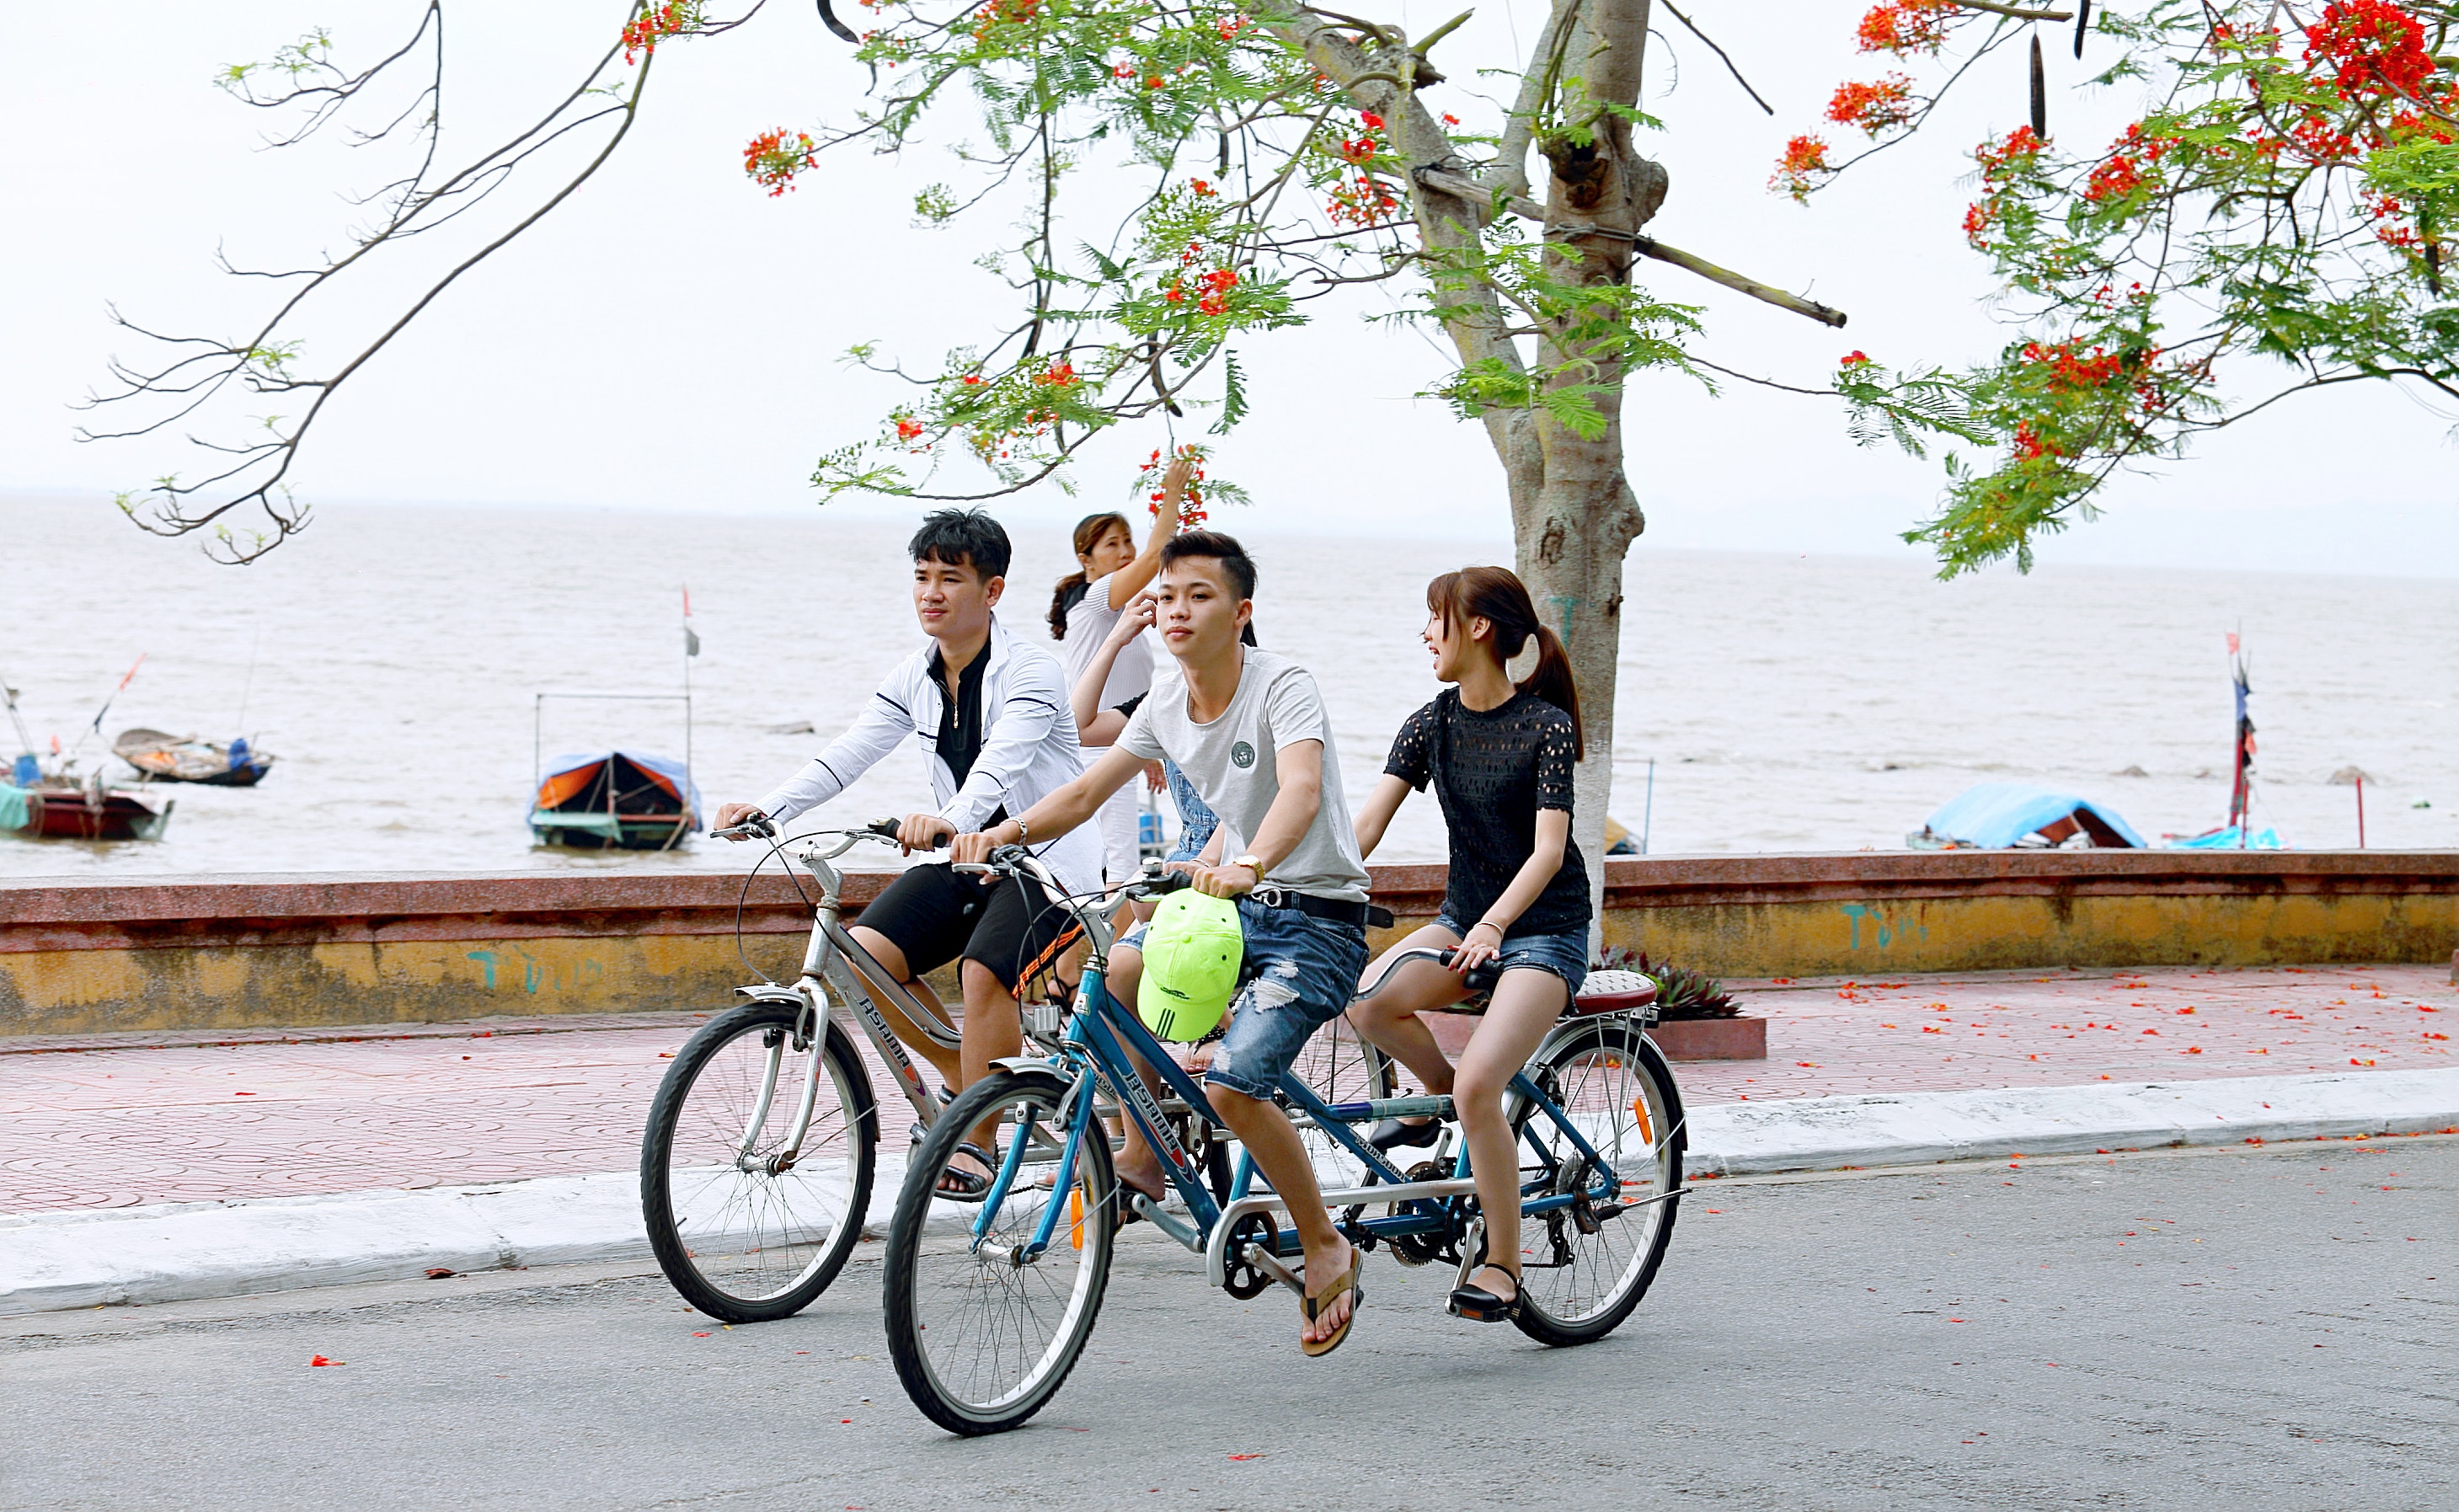 Two boys and one girl riding bicycles on road beside body of water photo